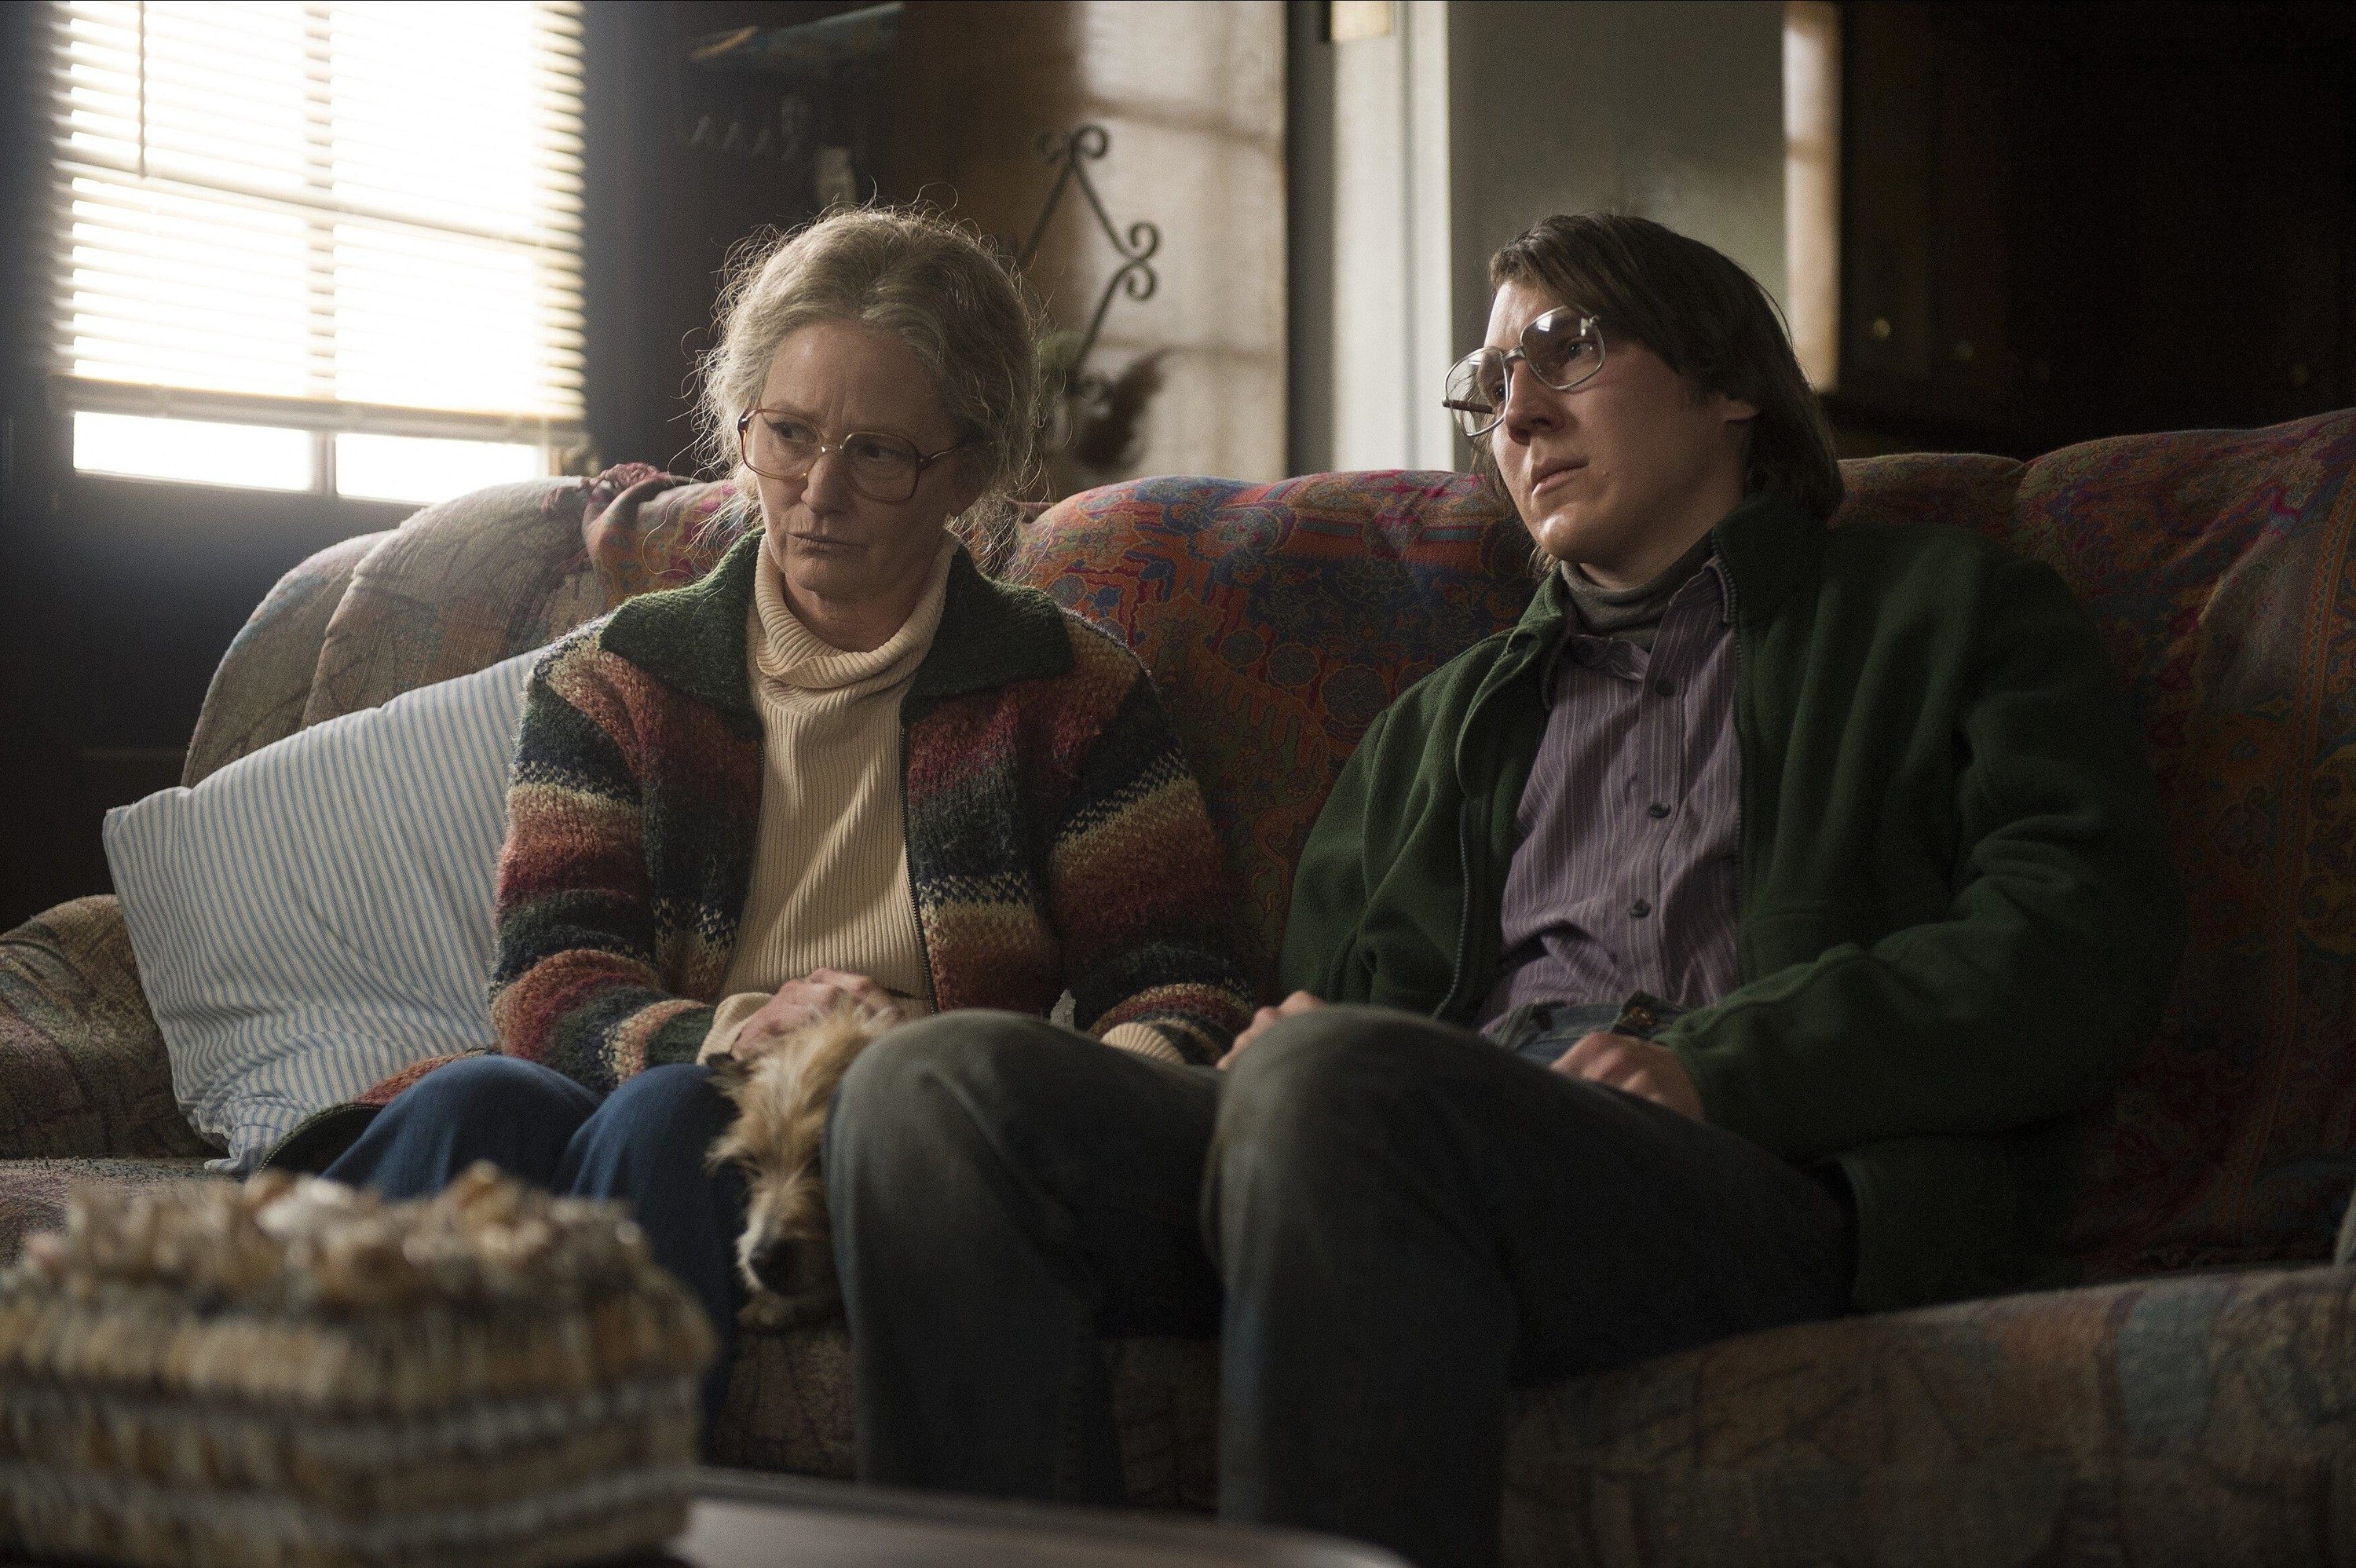 Melissa Leo and Paul Dano sit on an old couch